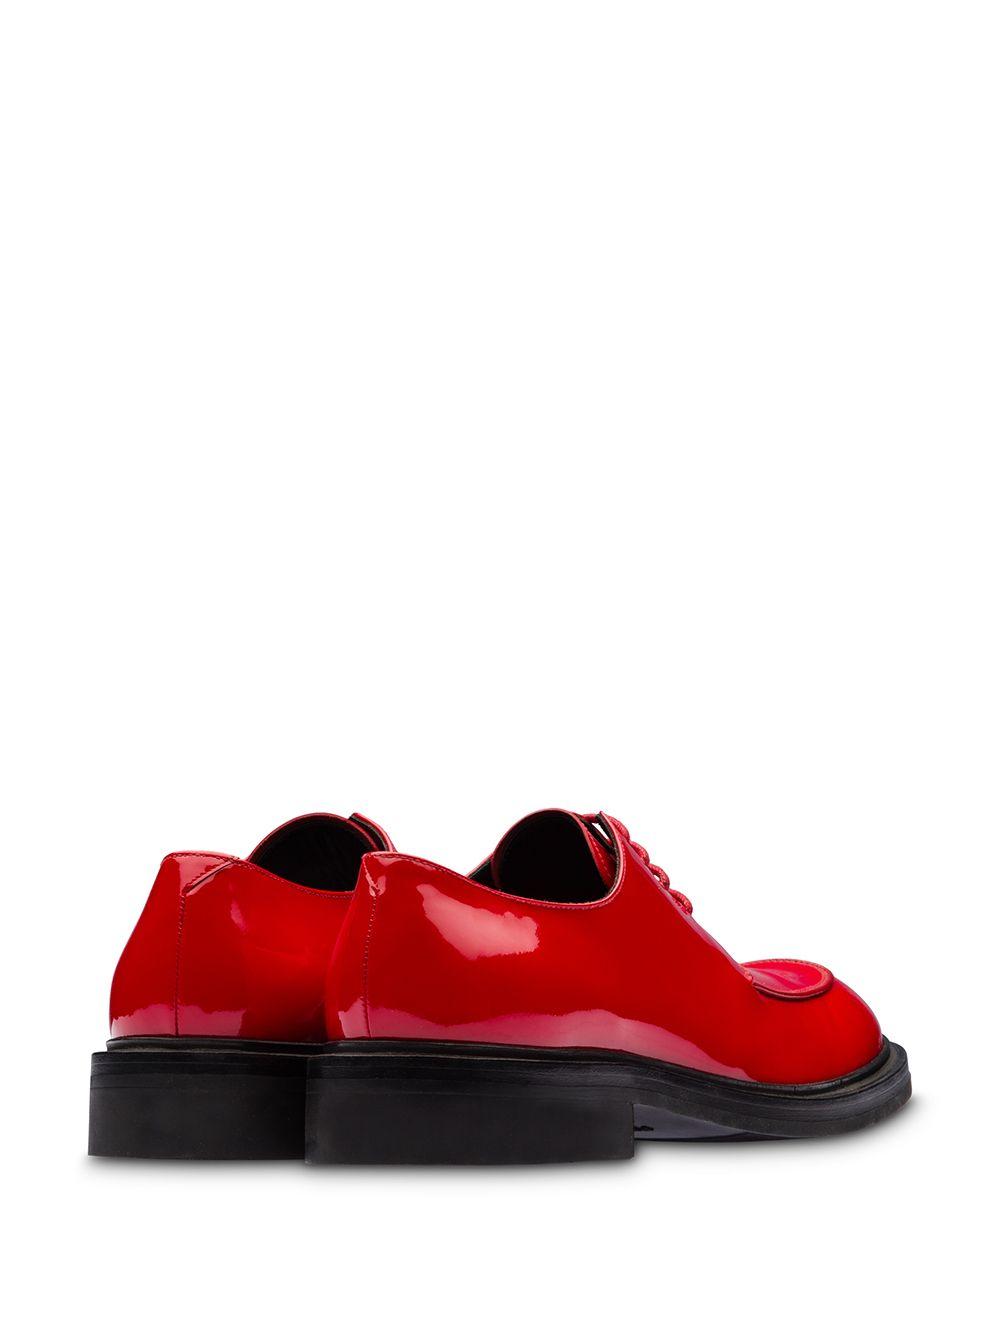 prada red sole shoes